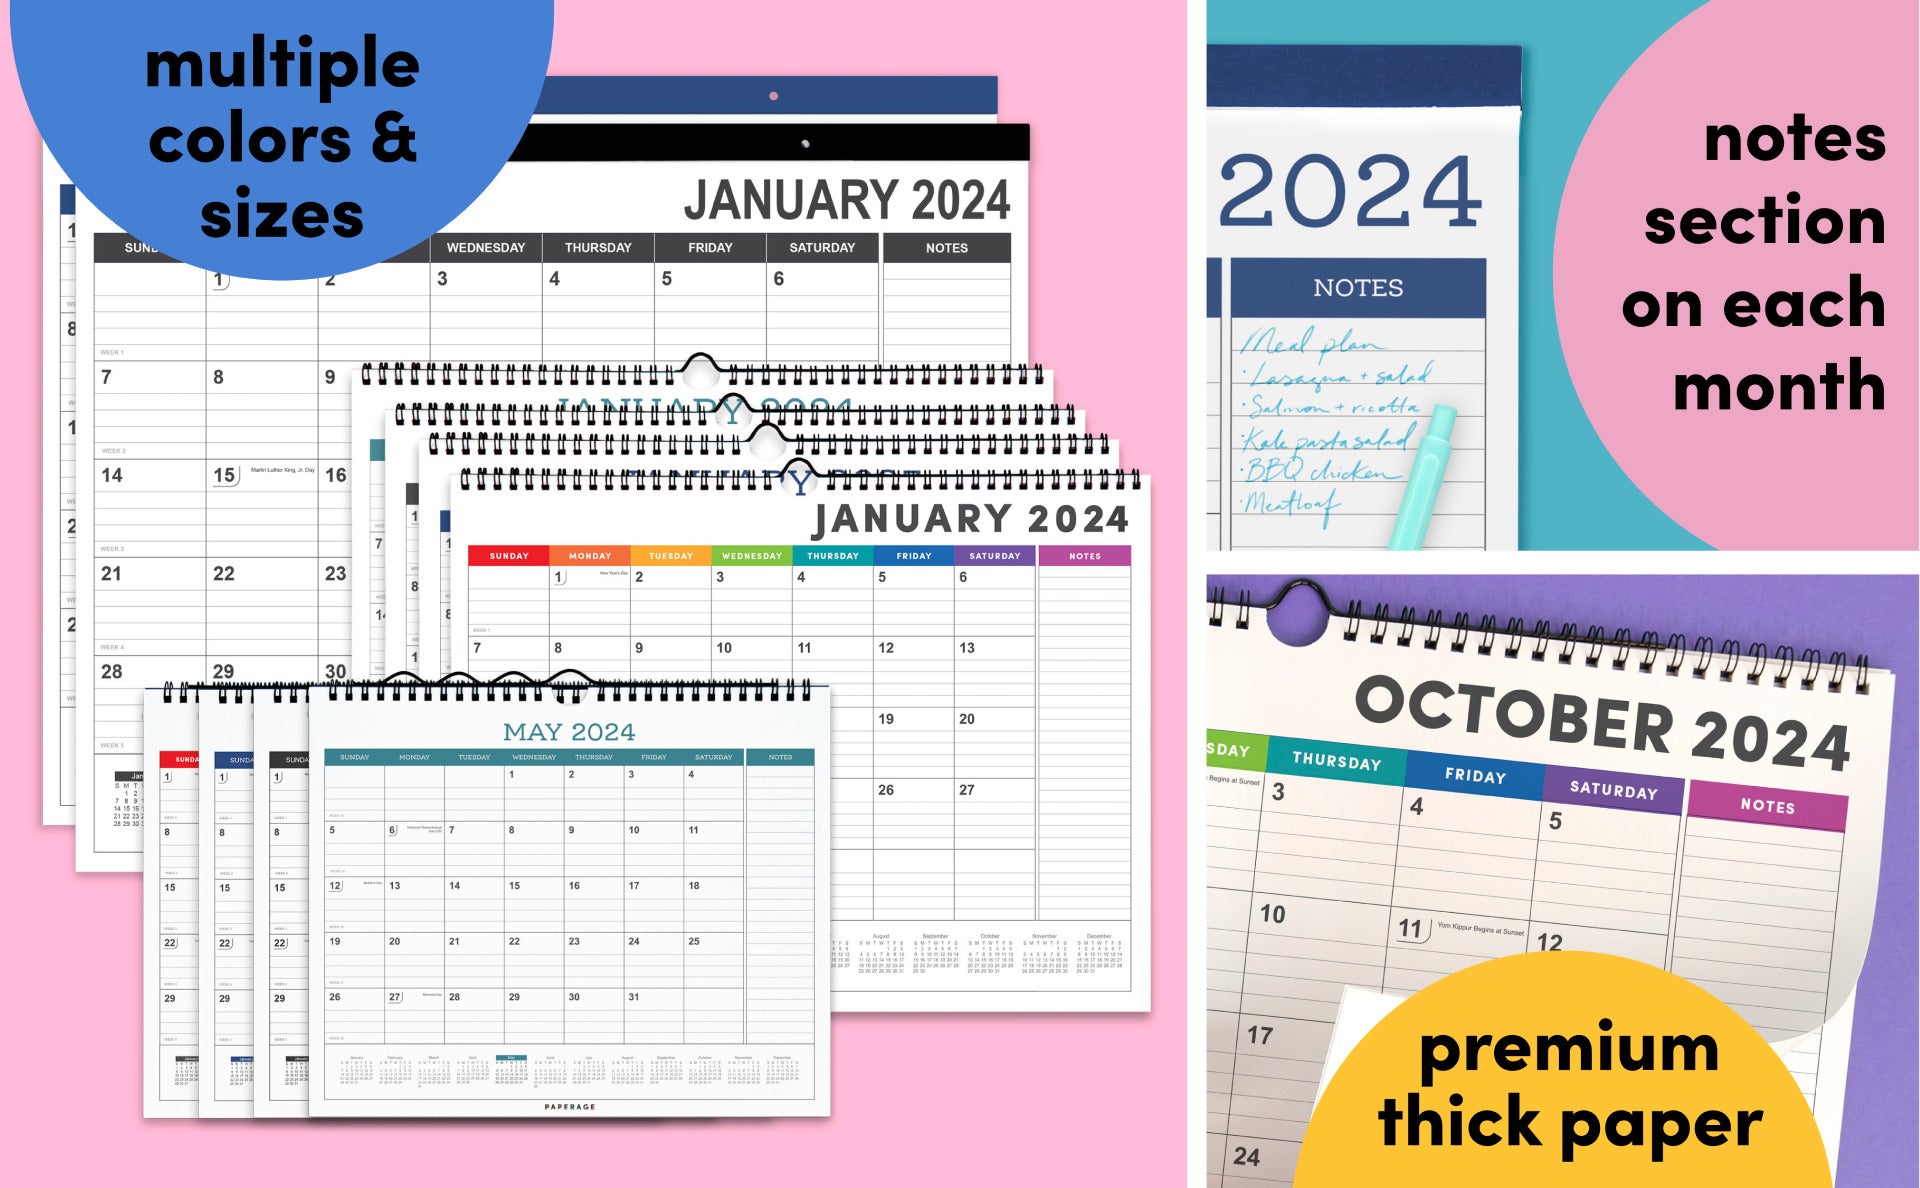 Paperage monthly planner with daily appointment details, to-do lists, and goal tracking.